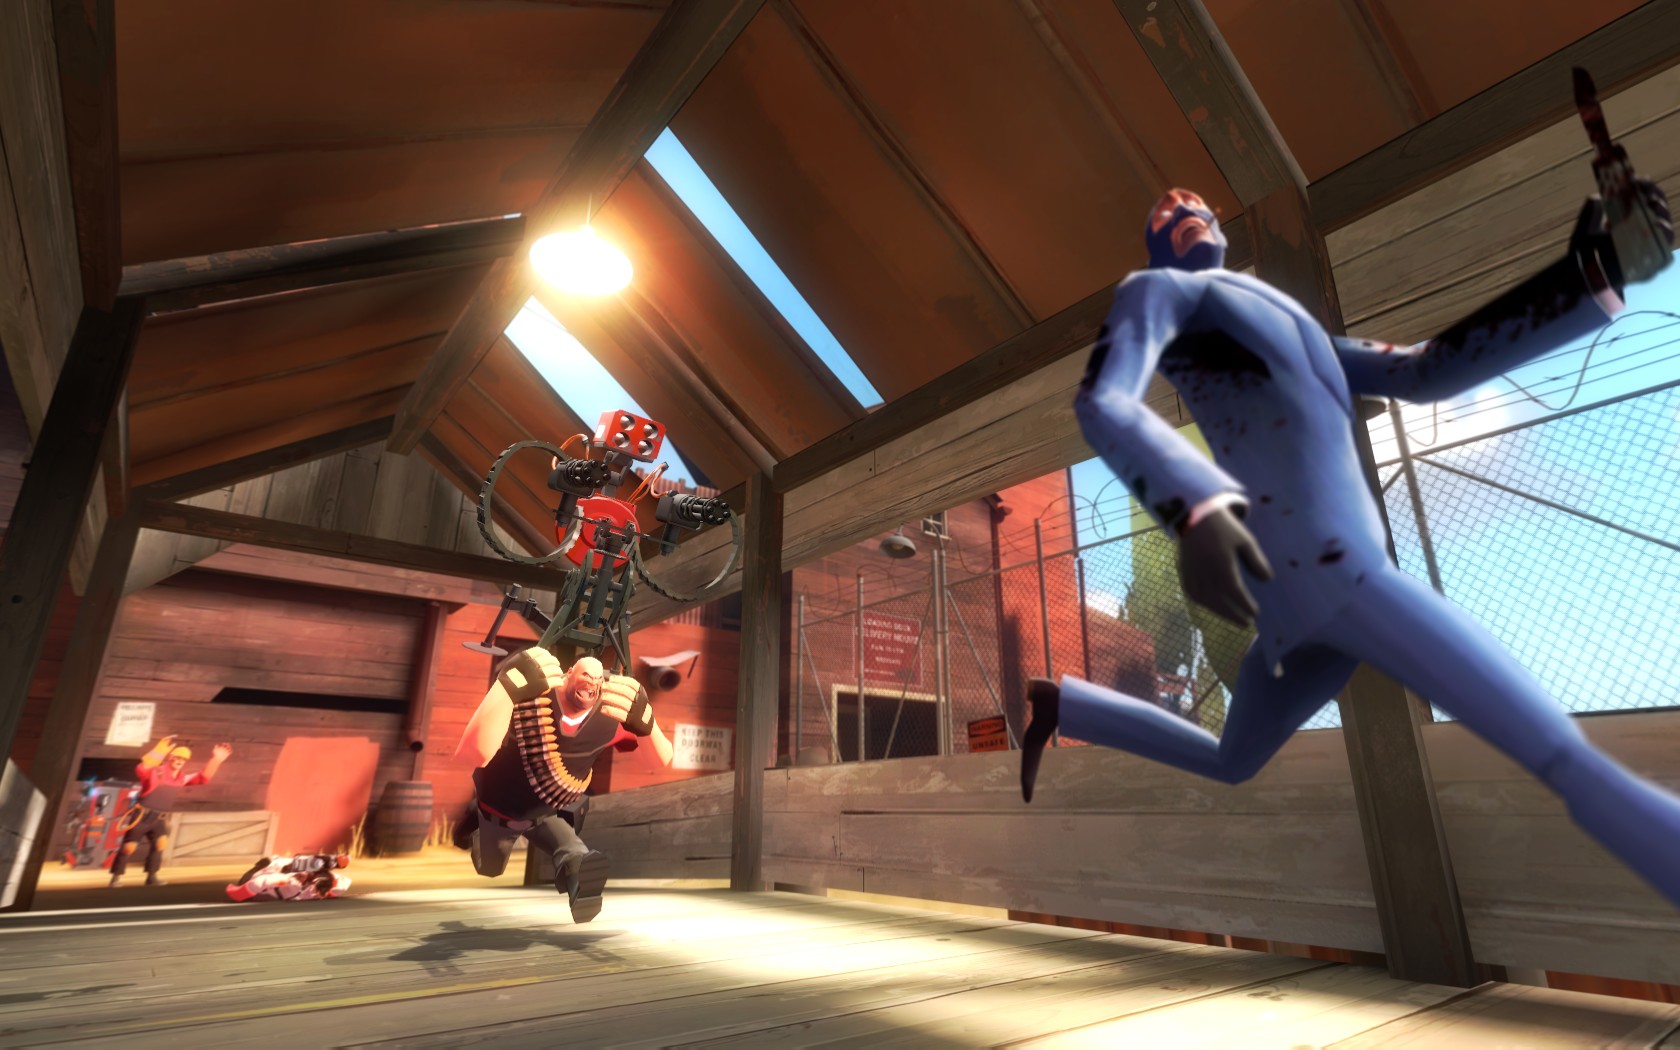 230+ Team Fortress 2 HD Wallpapers and Backgrounds